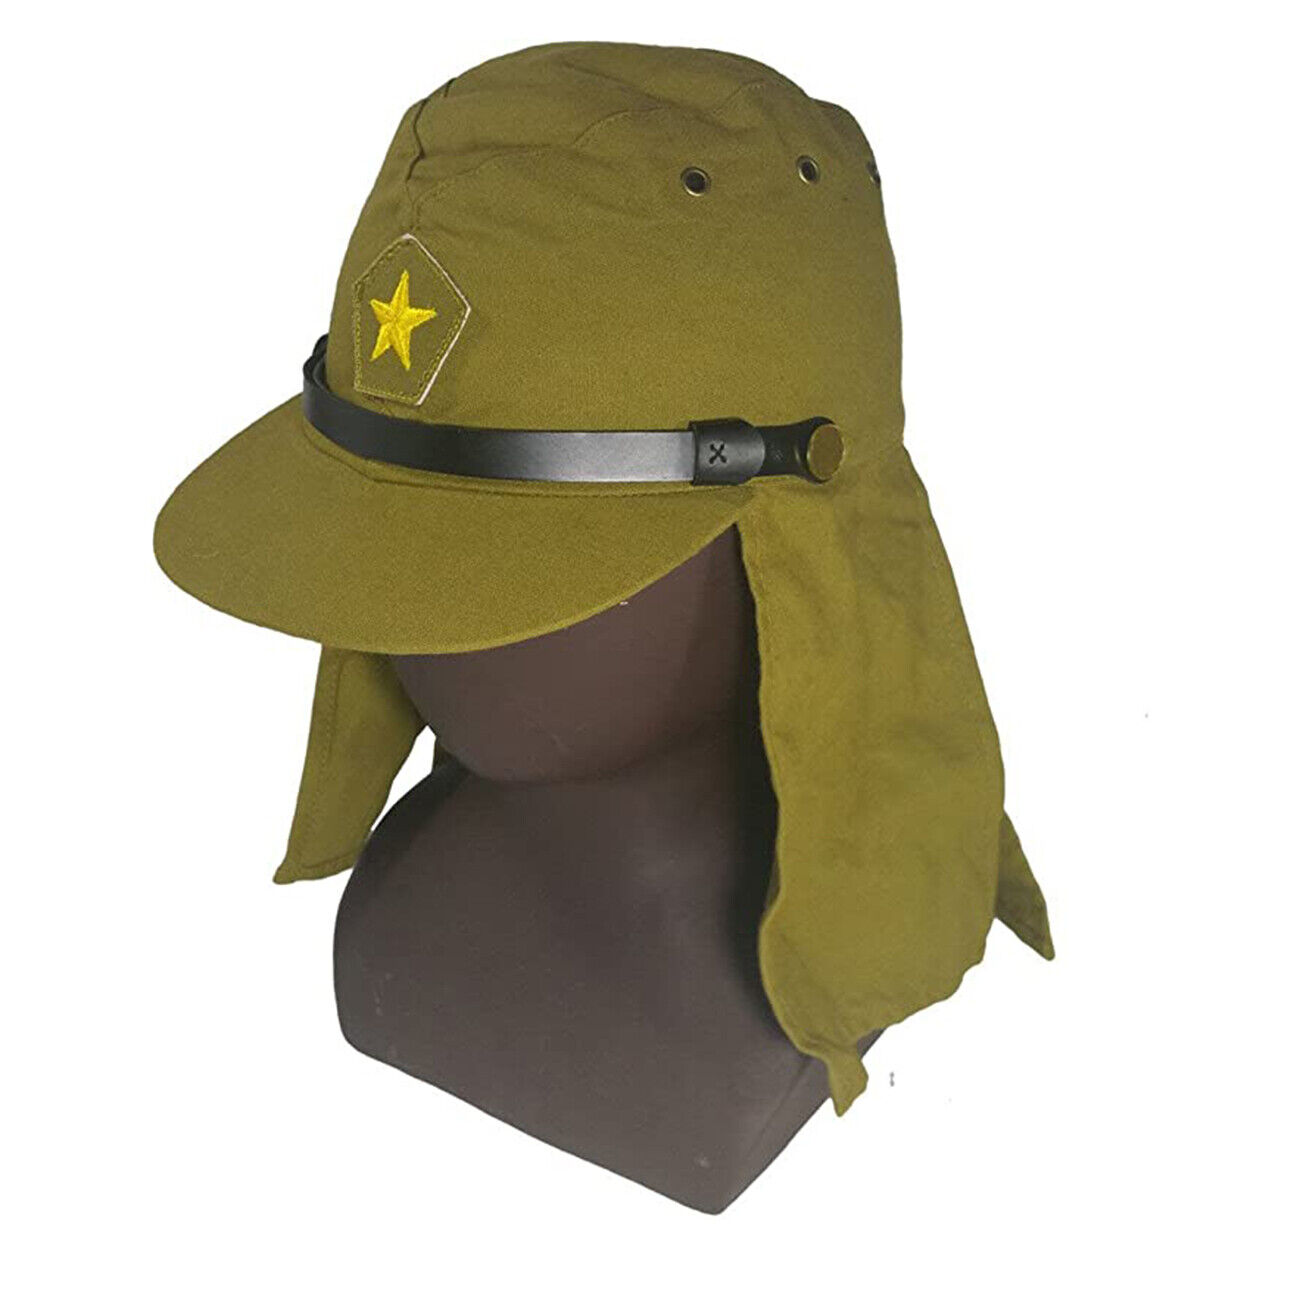 WW2 Japanese Hat with Neck Flap Soldier Reproduction